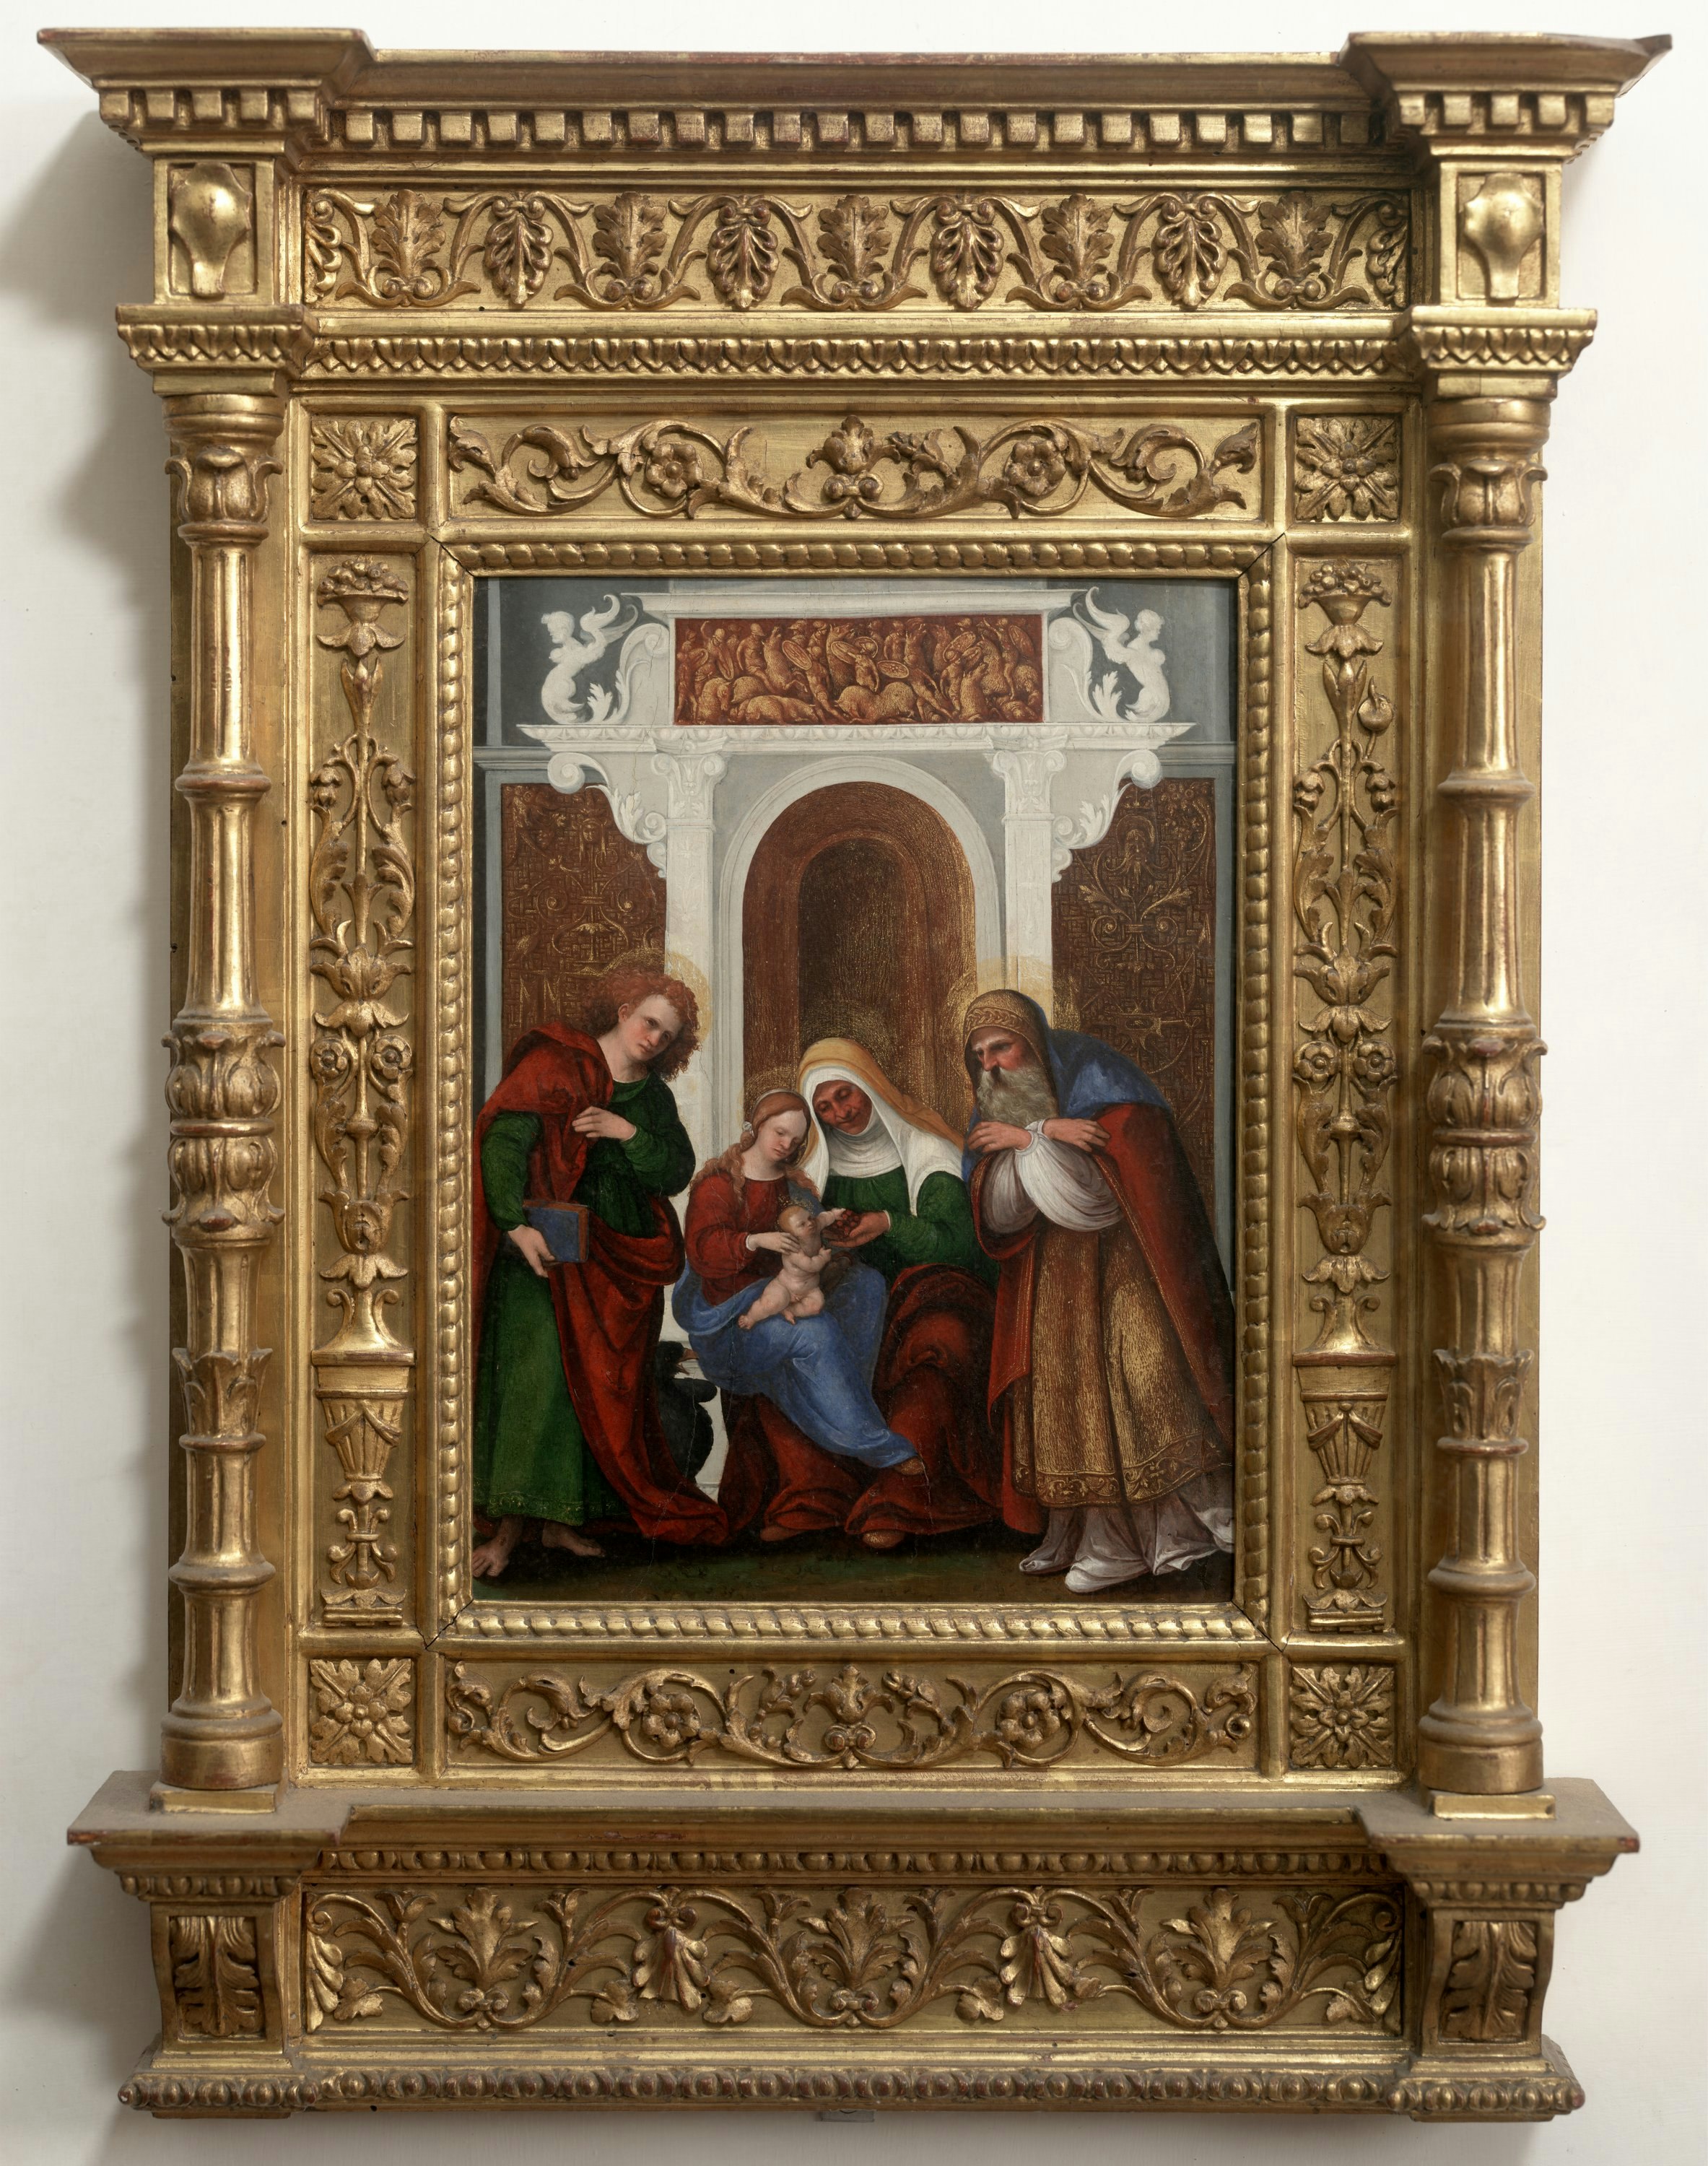 Madonna and Child with St. Anne, St. Joachim and St. John the Evangelist